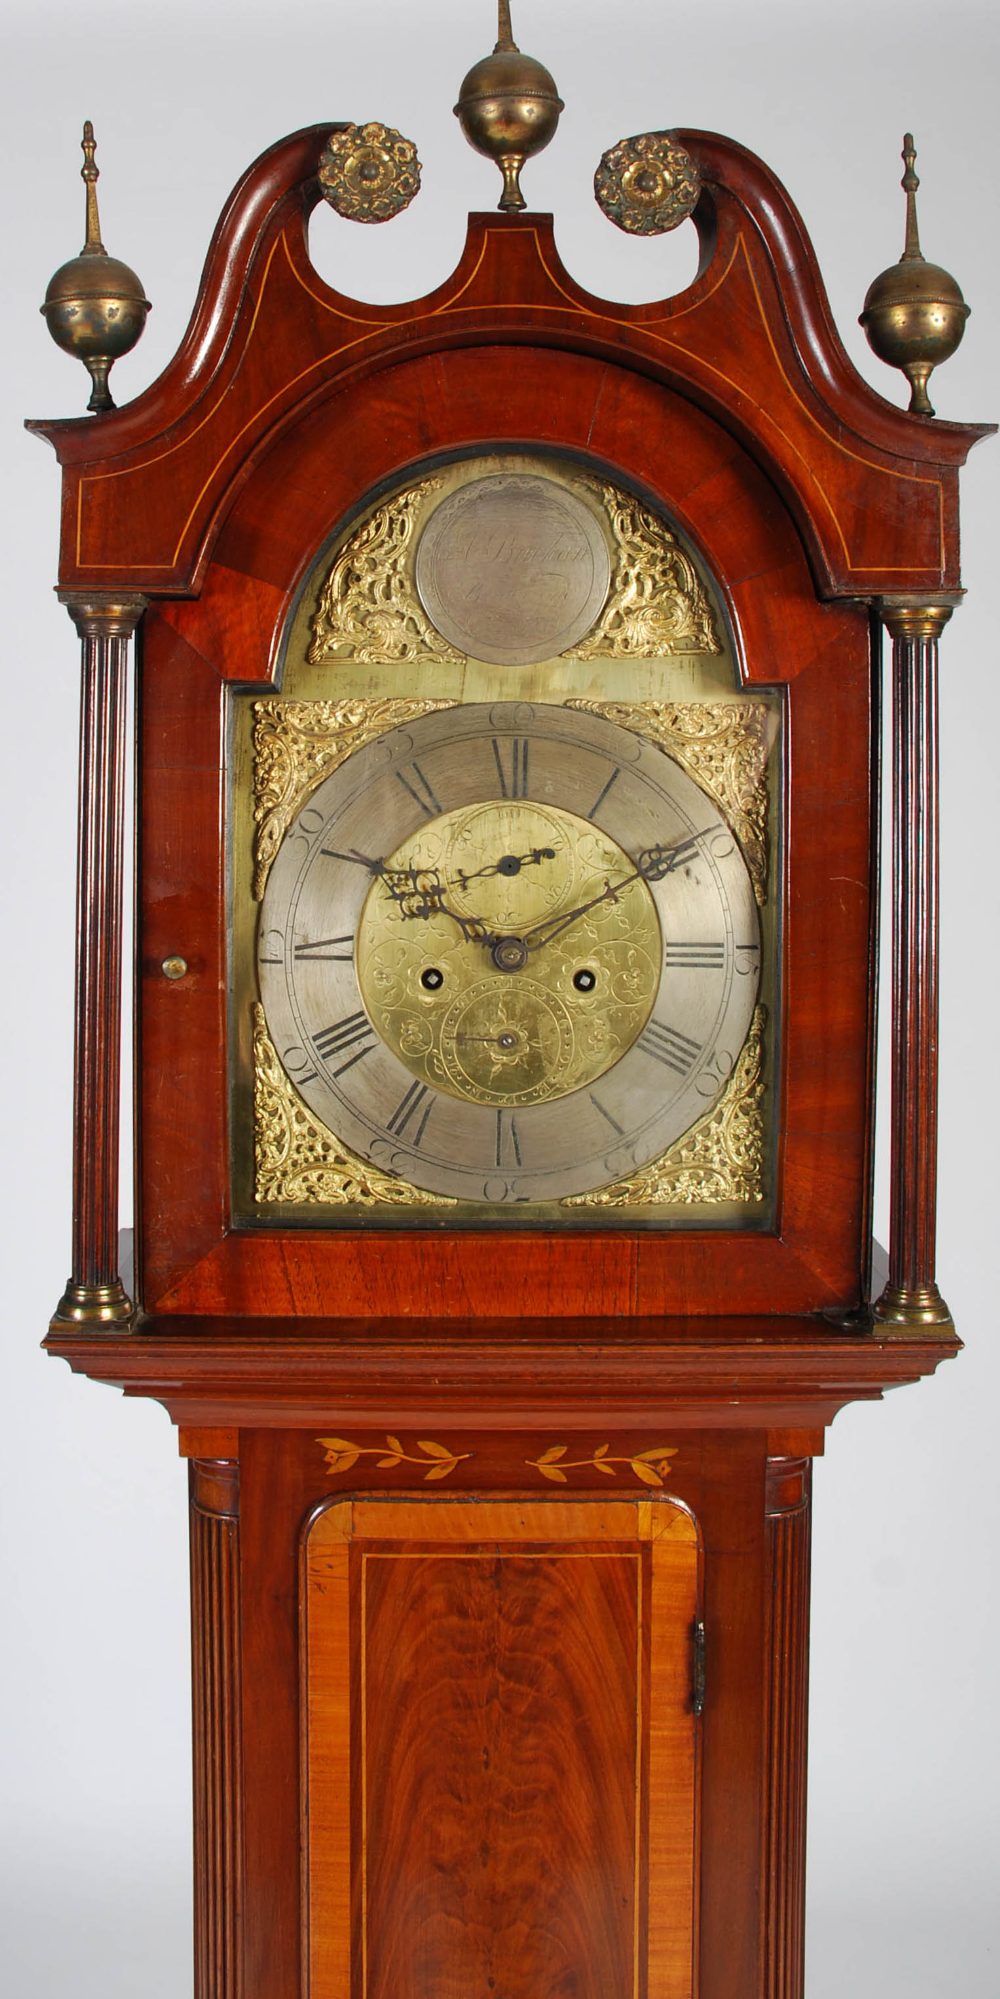 A Late 18th/ early 19th century mahogany and marquetry inlaid longcase clock, A. Buchan, Bridgend, - Image 2 of 9